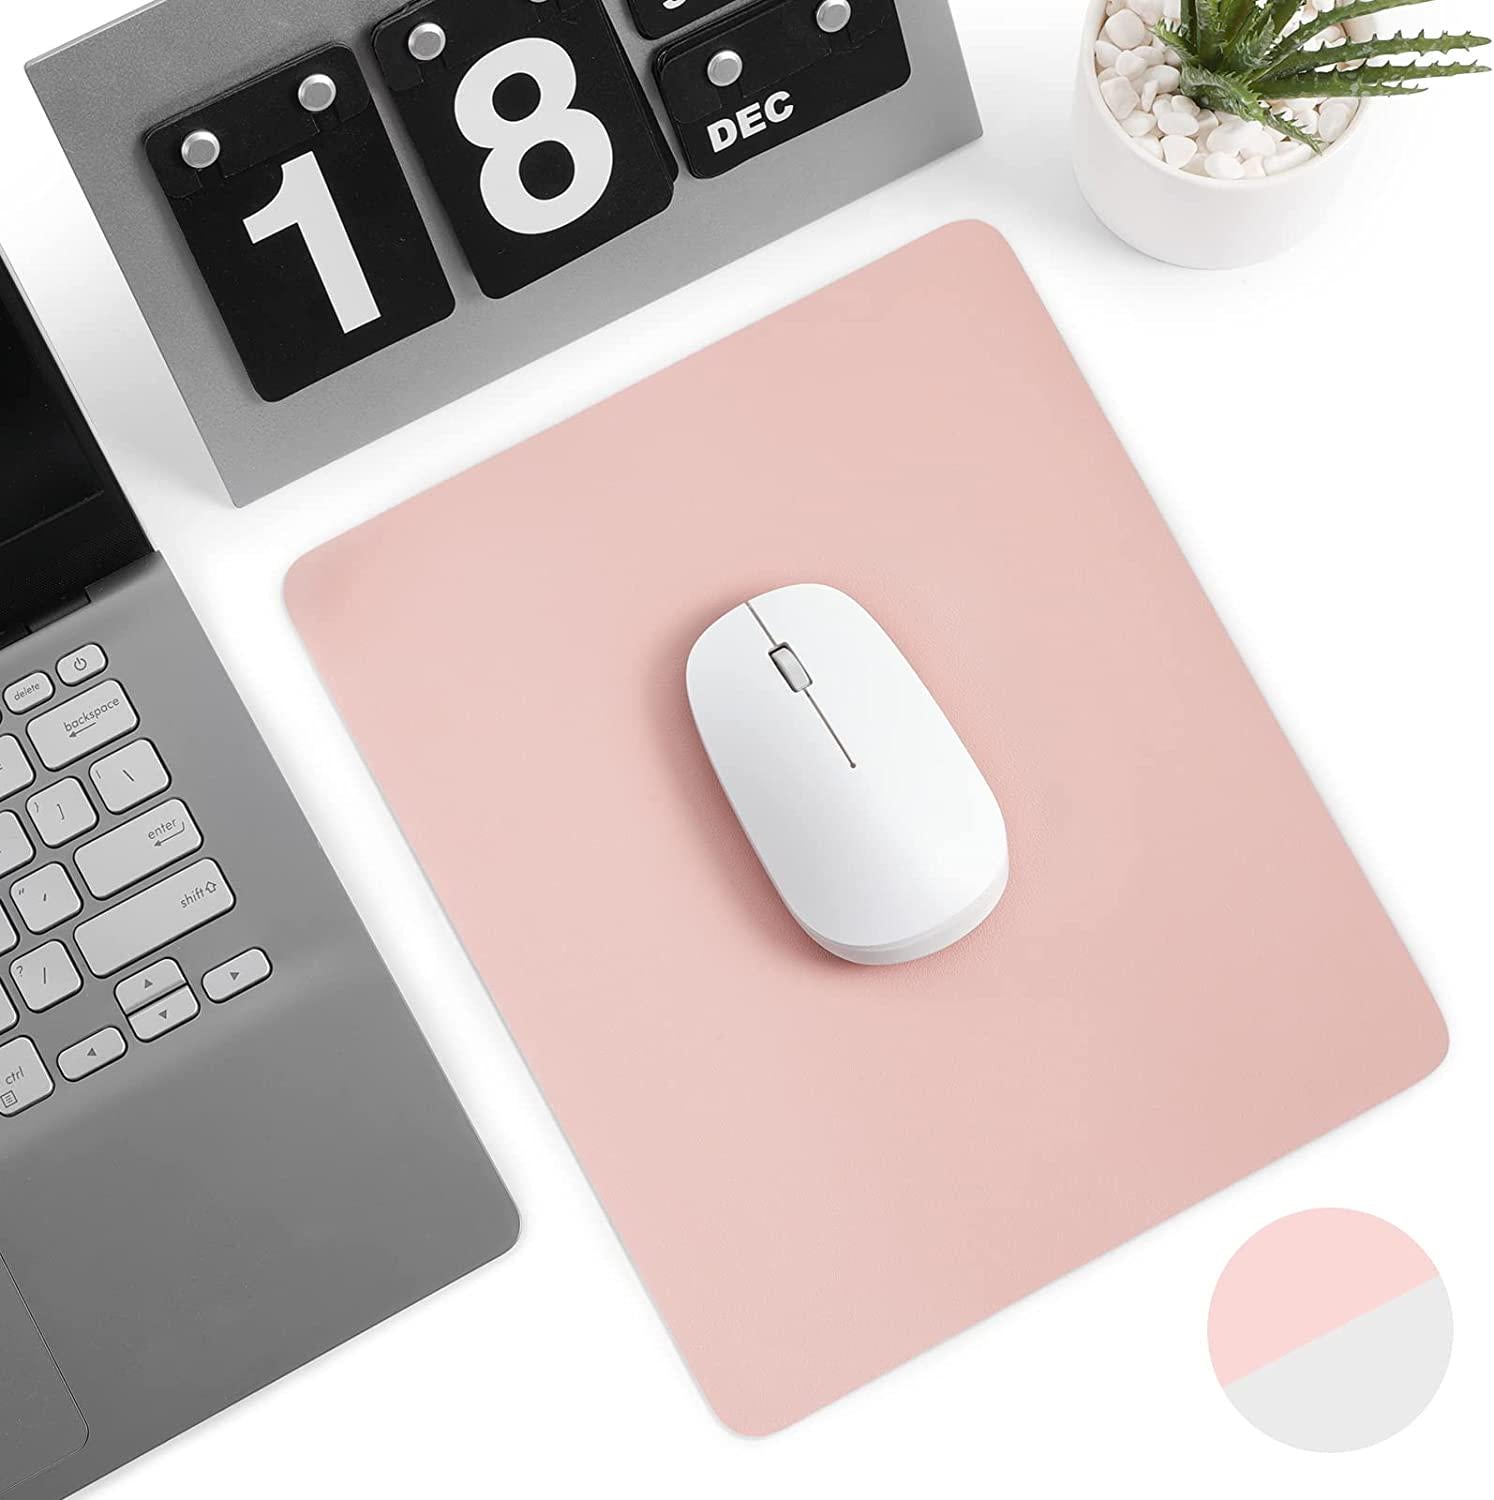 Levoit, Levoit Mouse Pad 23x20cm, Small PU Leather Mouse Mat, Double-Sided Use Desktop Mousepad, Smooth Waterproof Surface for Gaming and Working, Non-Slip and Stain-Resistant for Home Office (Pink and Silver)